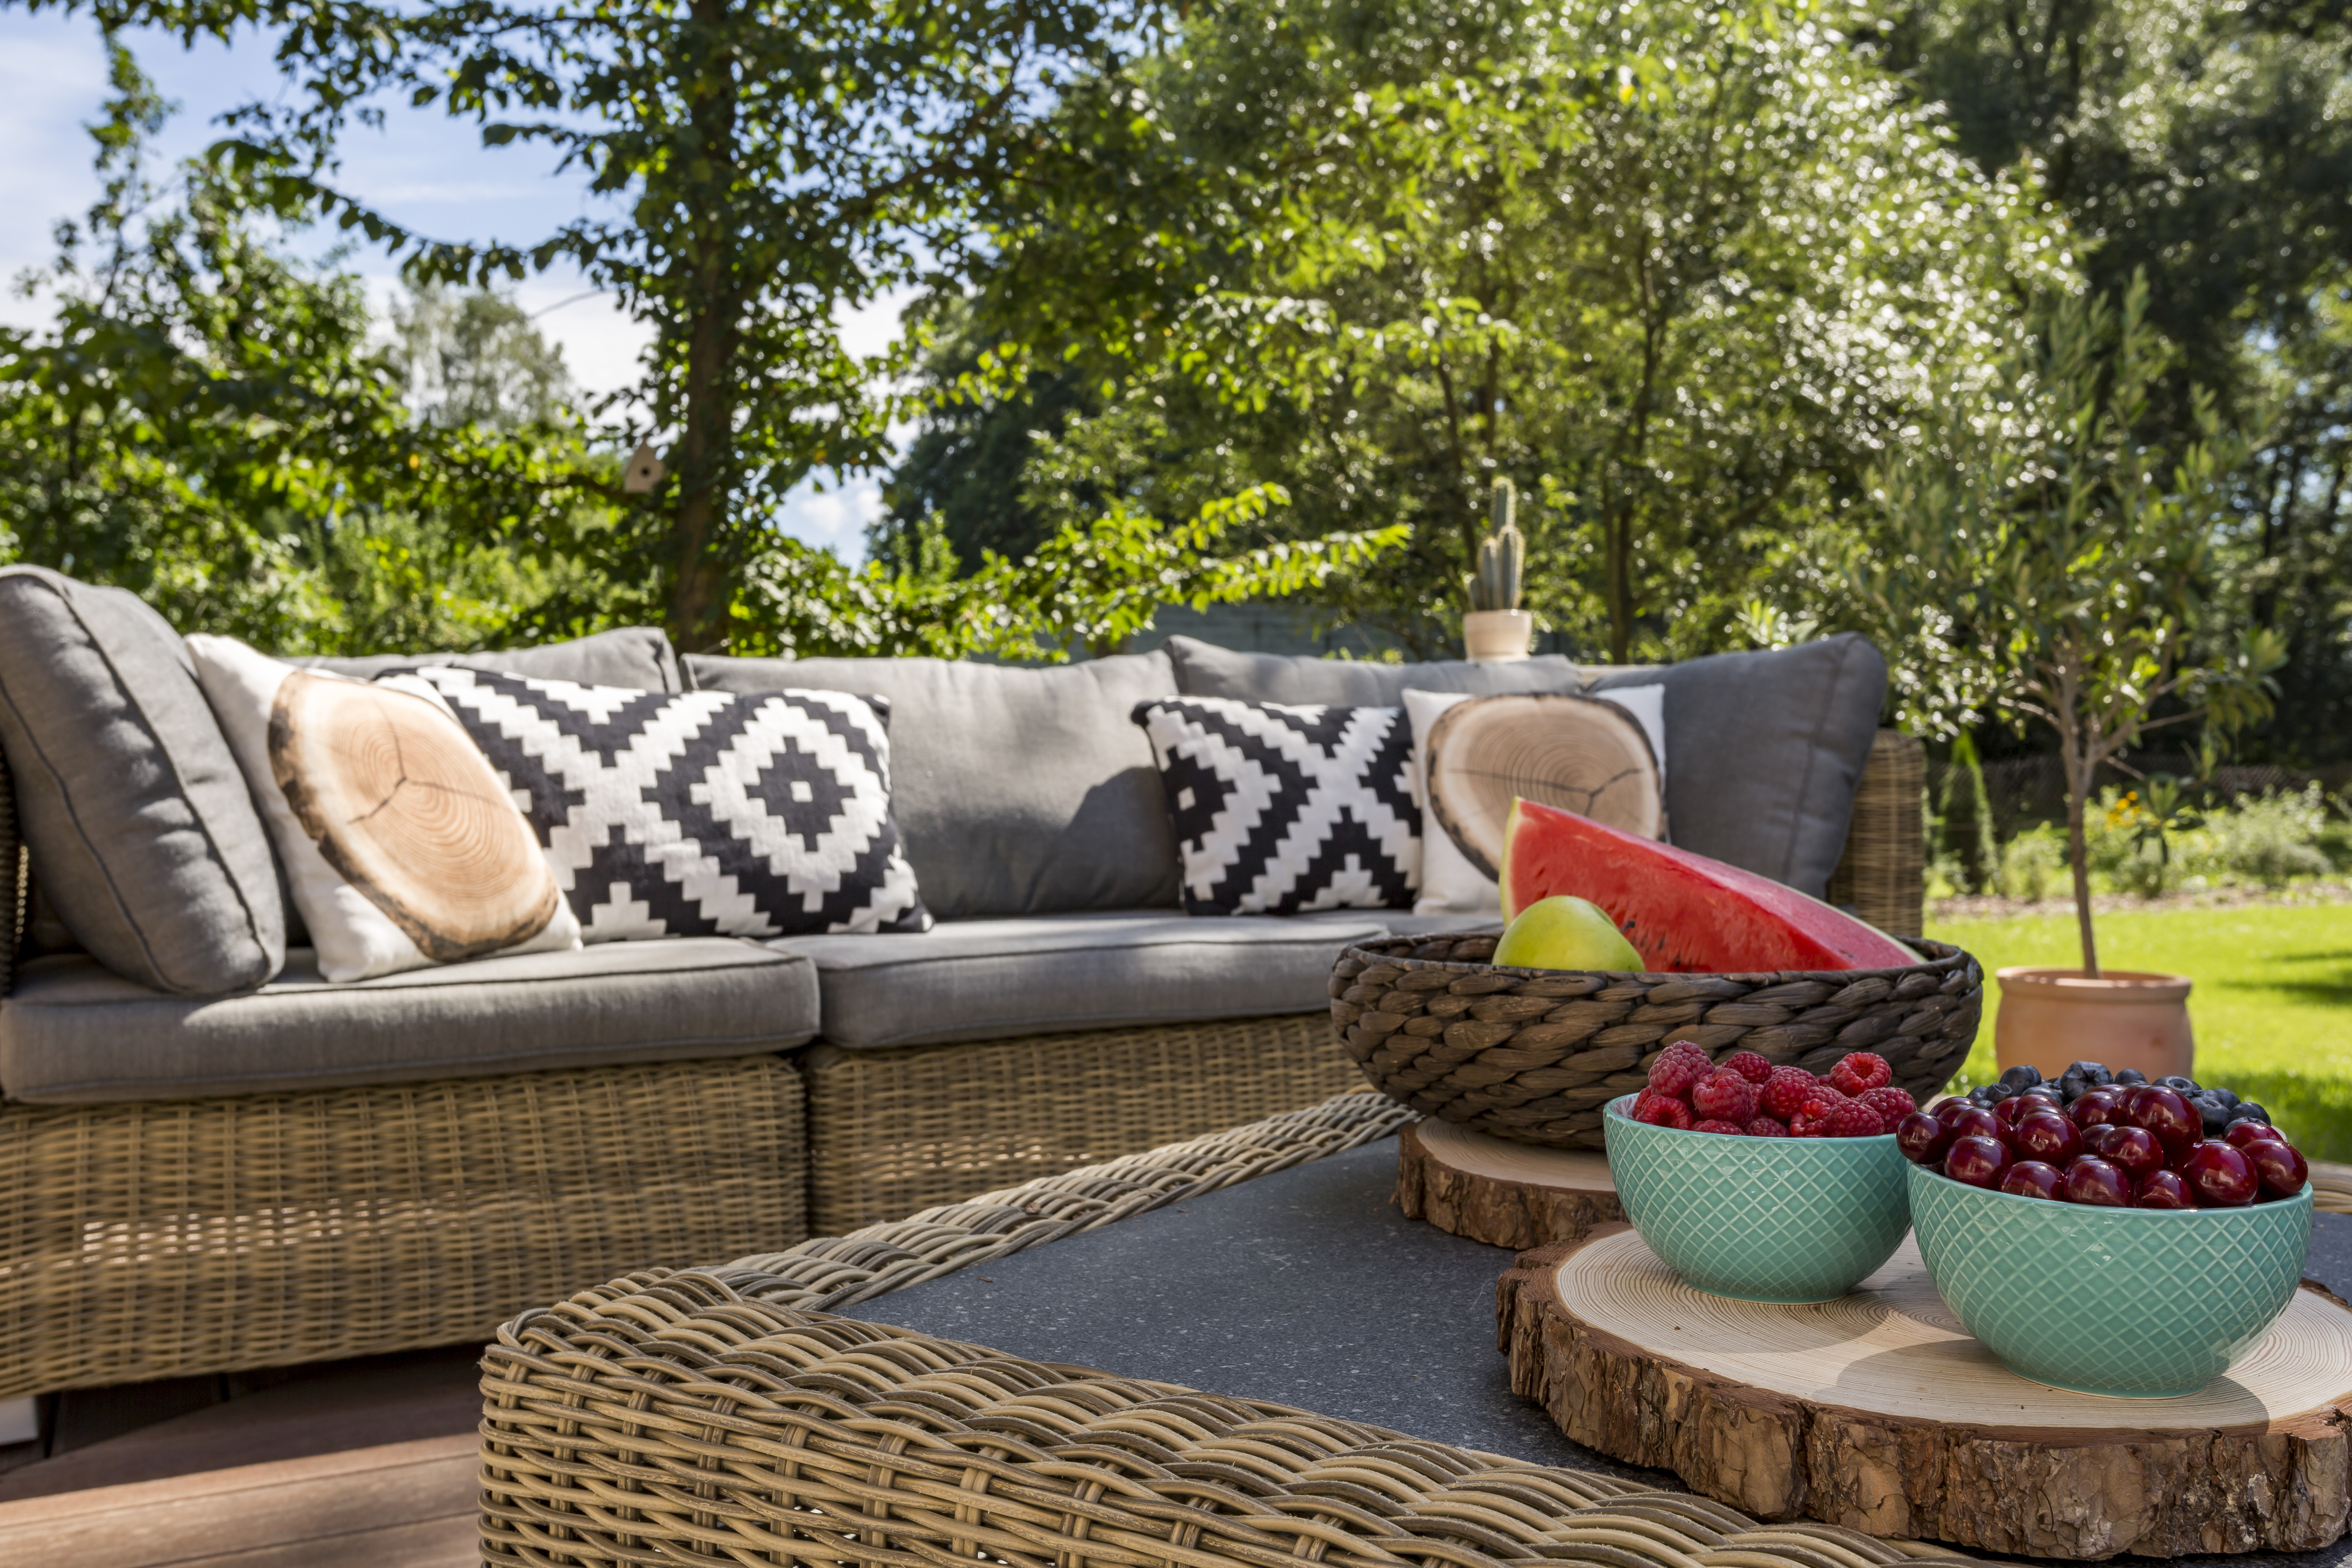 Image of an outdoor rattan sofa and coffee table, trees in the background